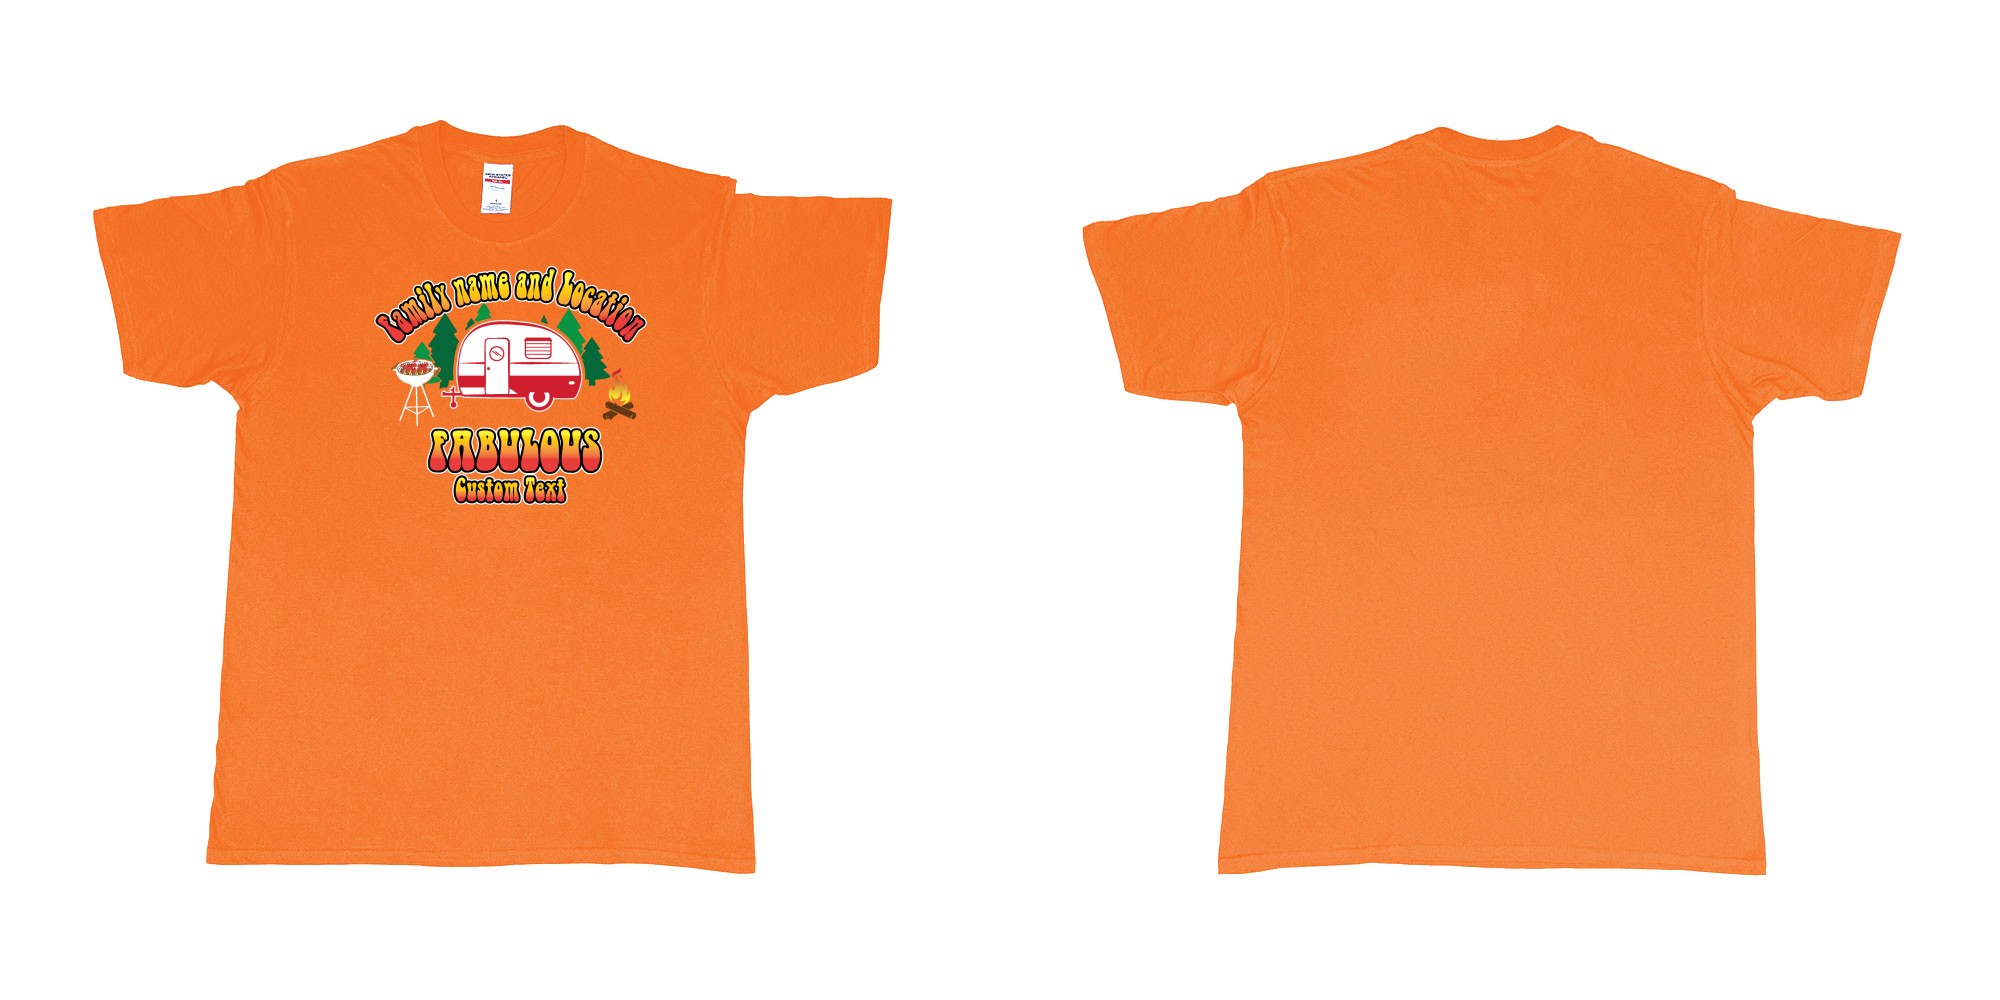 Custom tshirt design camping trailer fabulous custom family trip teeshirt print bali in fabric color orange choice your own text made in Bali by The Pirate Way